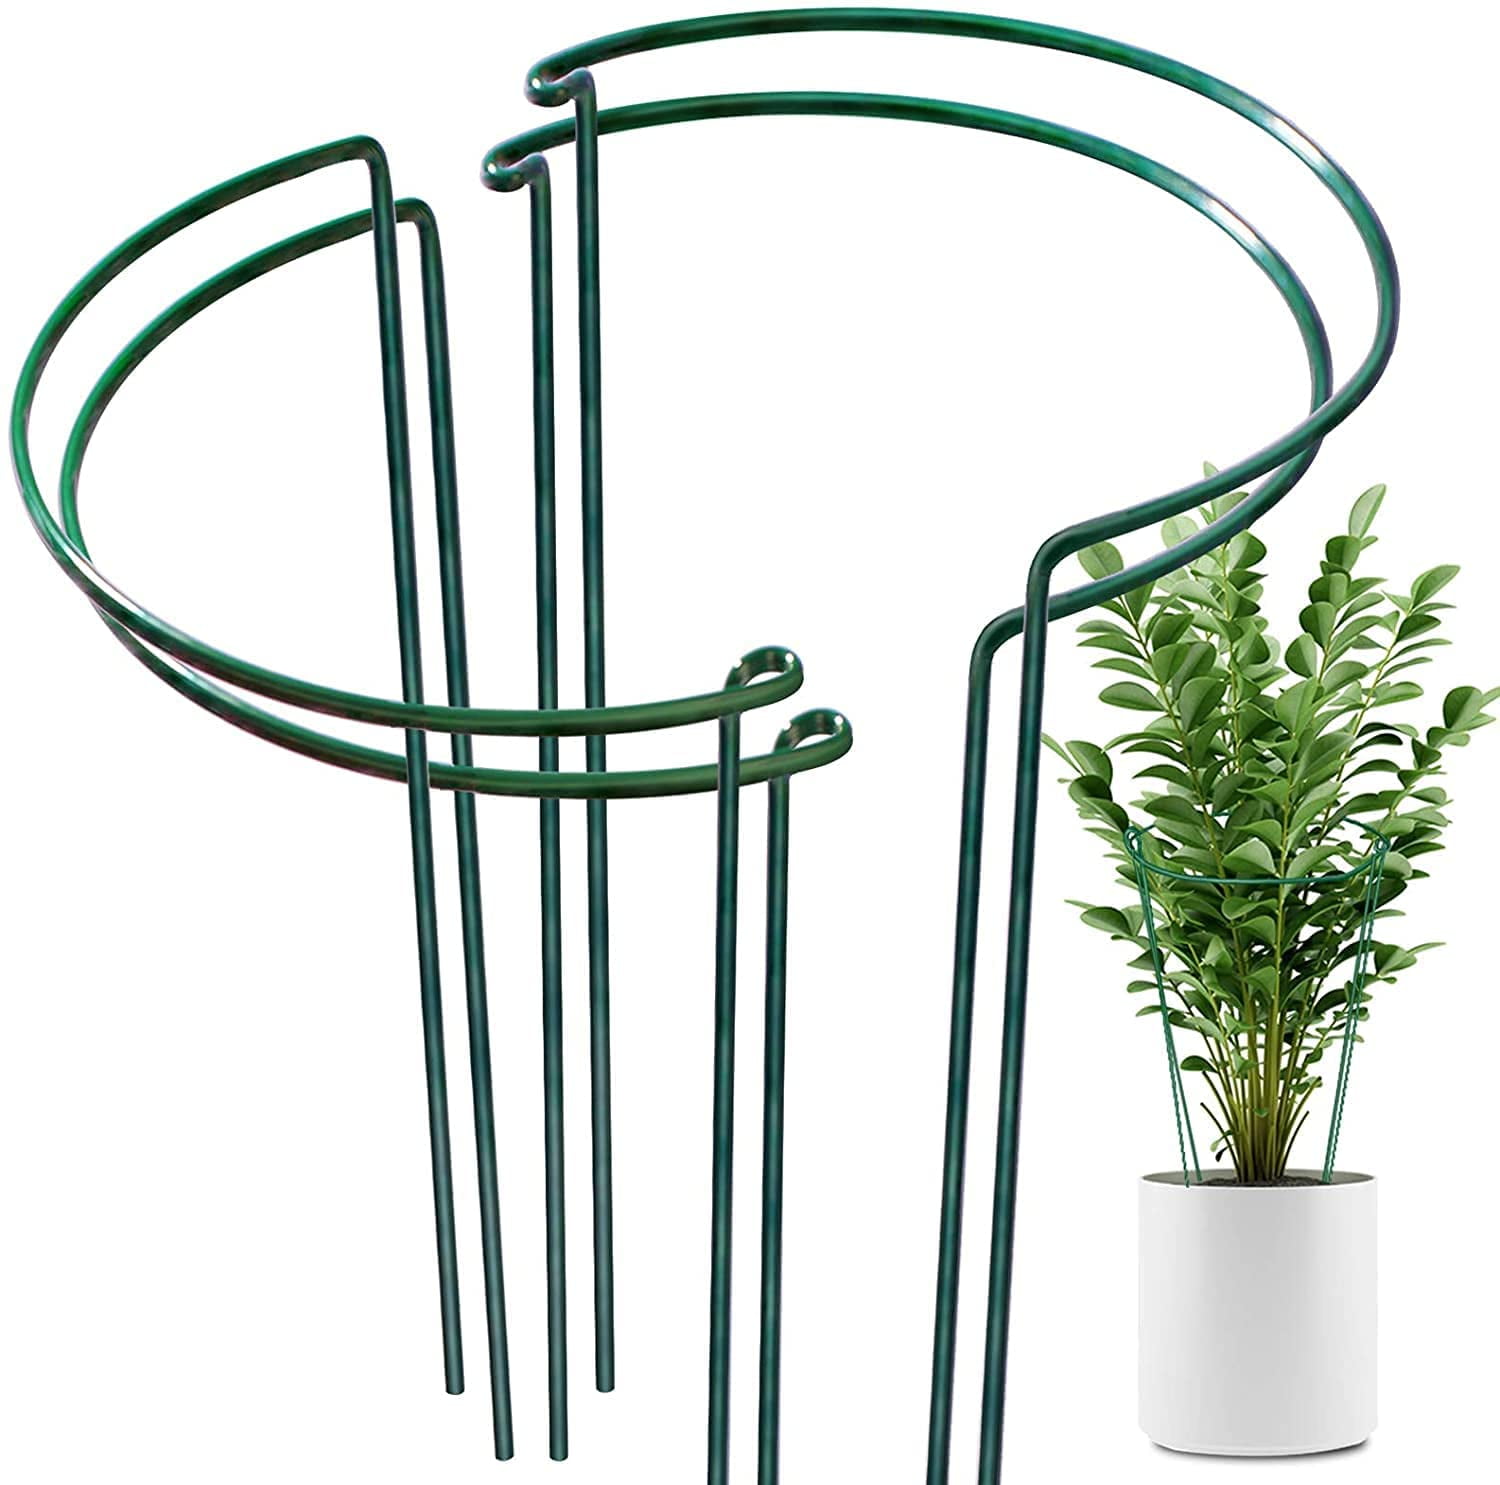 Rose 9.4 Wide x 15.6 High Plant Support for Tomato Green Half Round Plant Support Ring Hydrangea Metal Garden Plant Stake HiGift 4 Pack Plant Support Stake Plant Cage Vine 